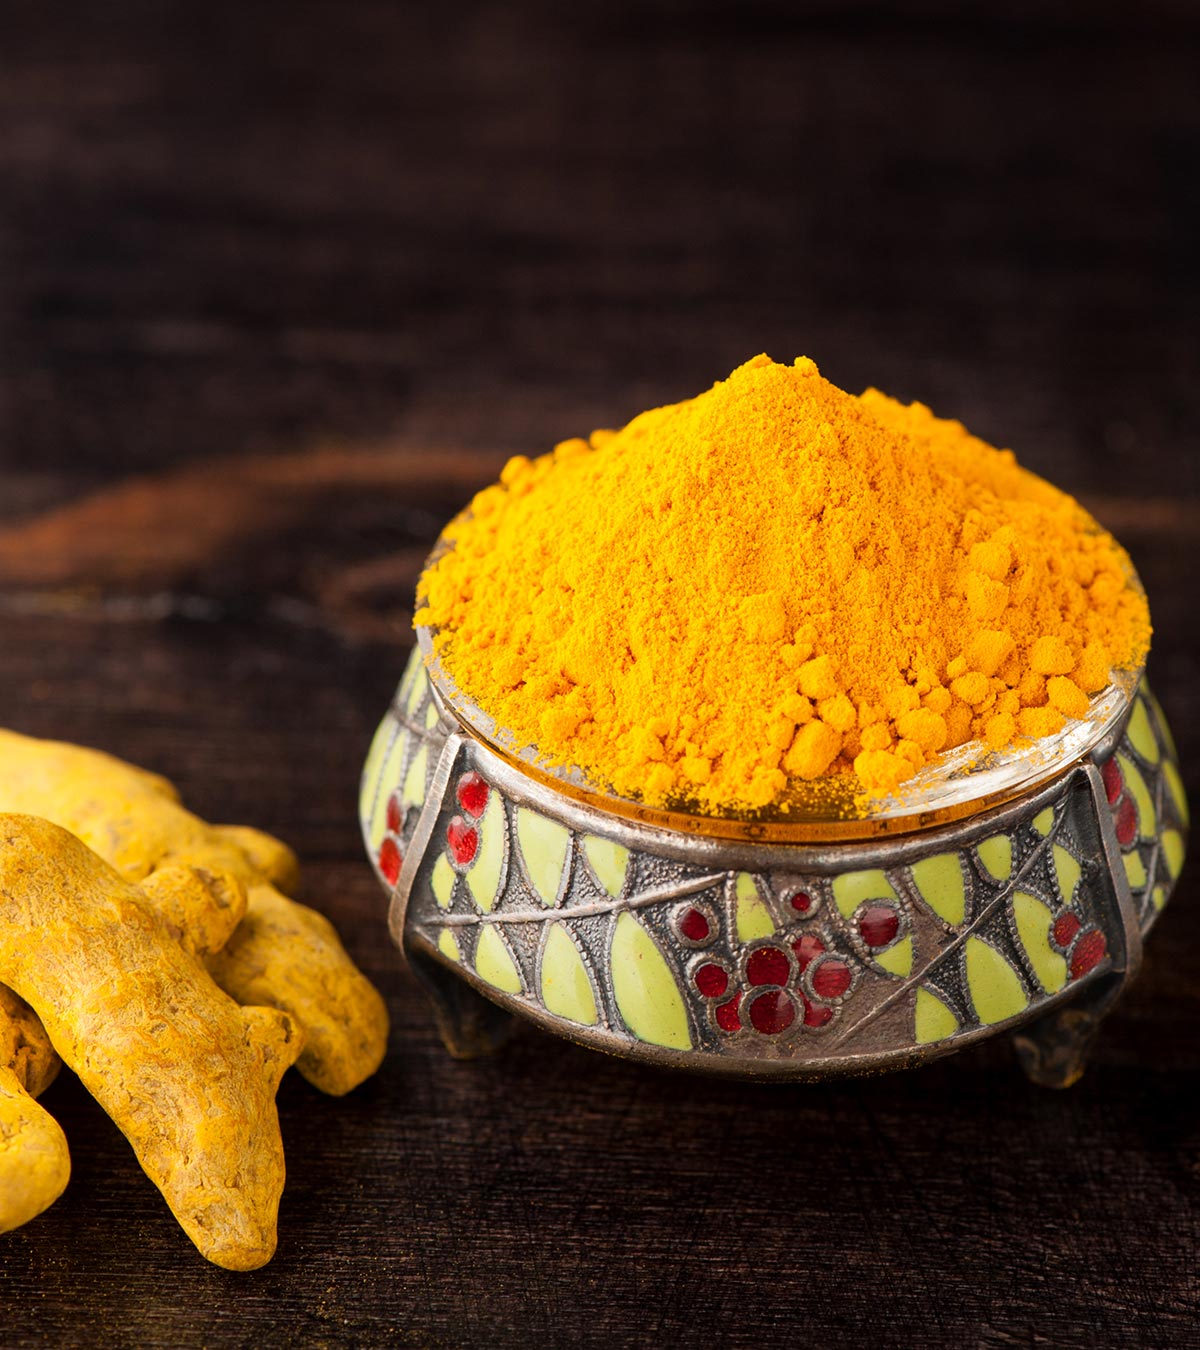 Can Babies Have Turmeric? Health Benefits And Precautions